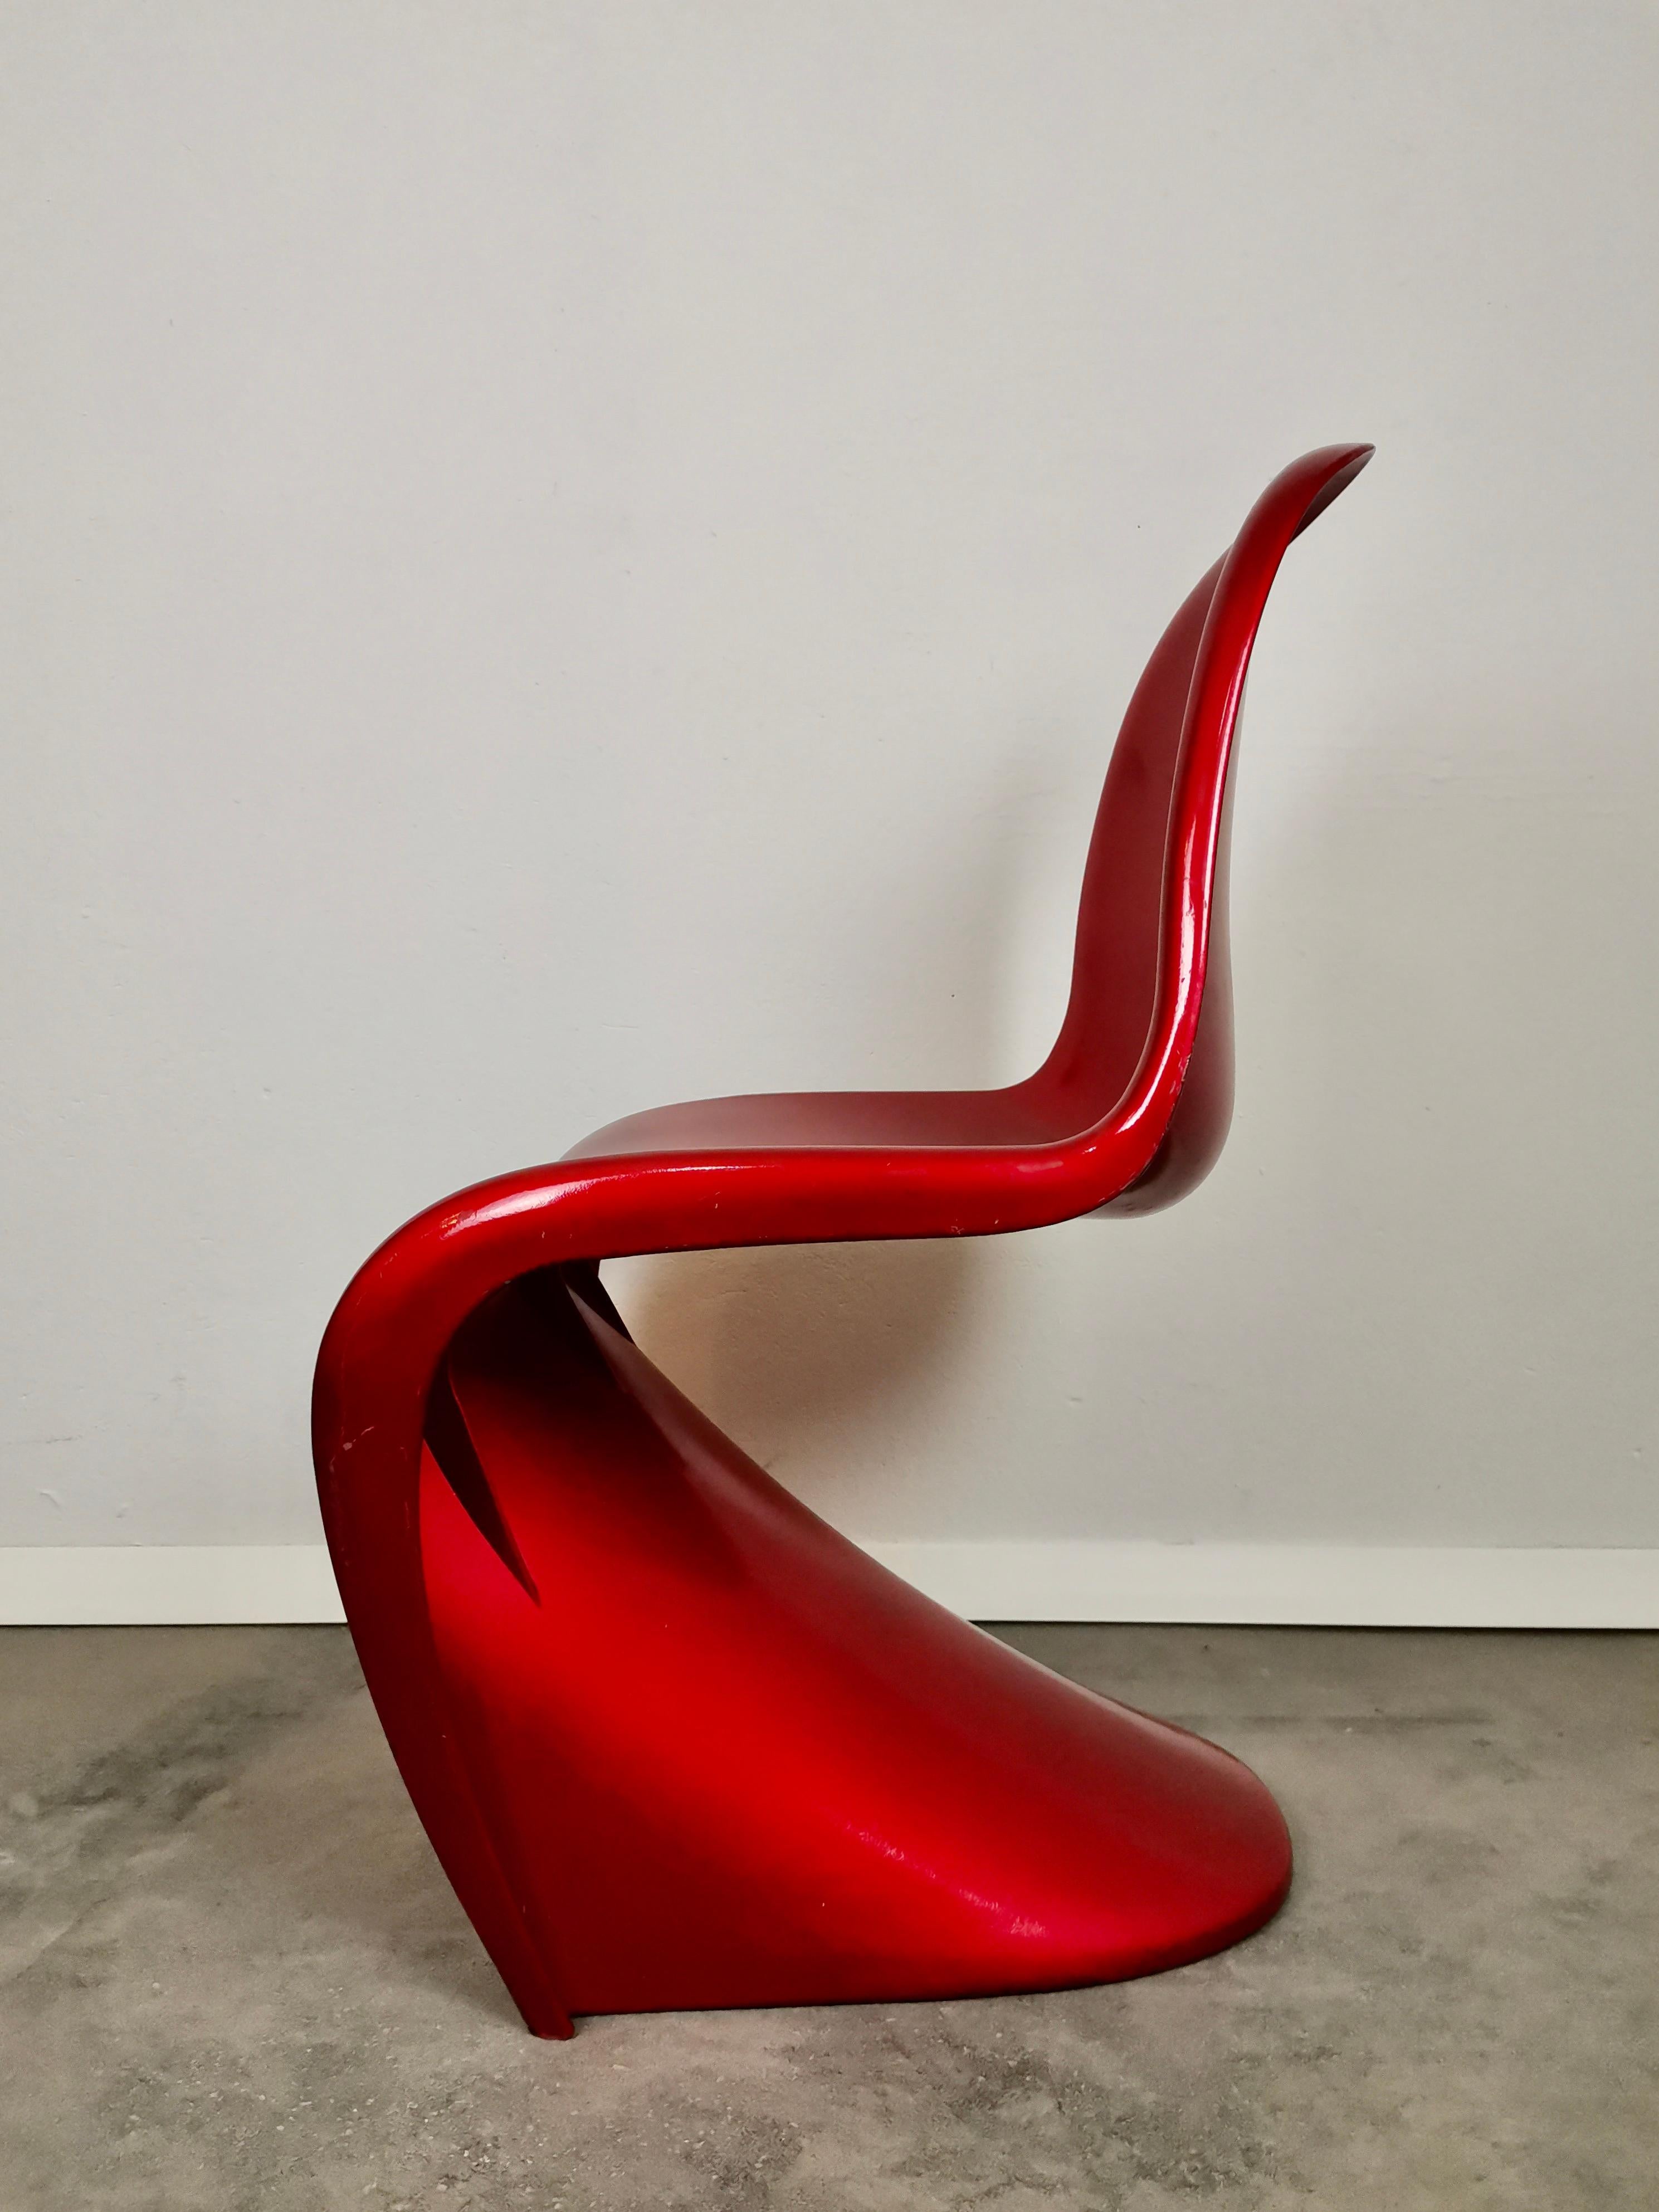 S Chair style chair by Verner Panton

Country of manufaturer: Italy

Period of production: 1990s

Material: fiberglass

Colur: dark red metalic

Condition: very good vintage condition, signs of use, some scratches on surface

Dimensions: